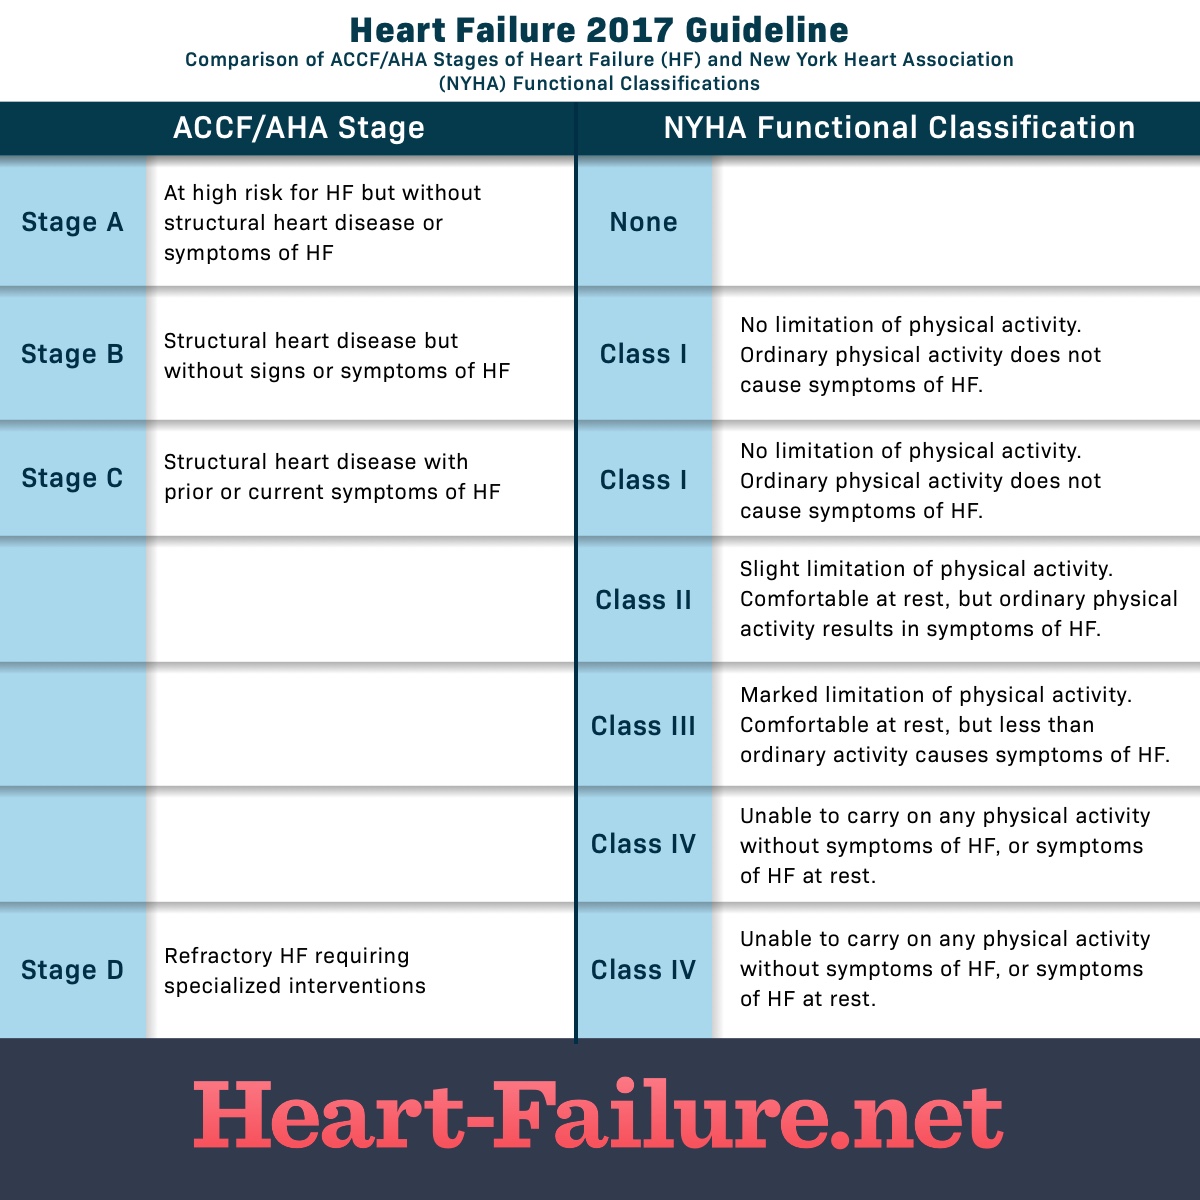 A chart showing the comparison of stages of heart failure